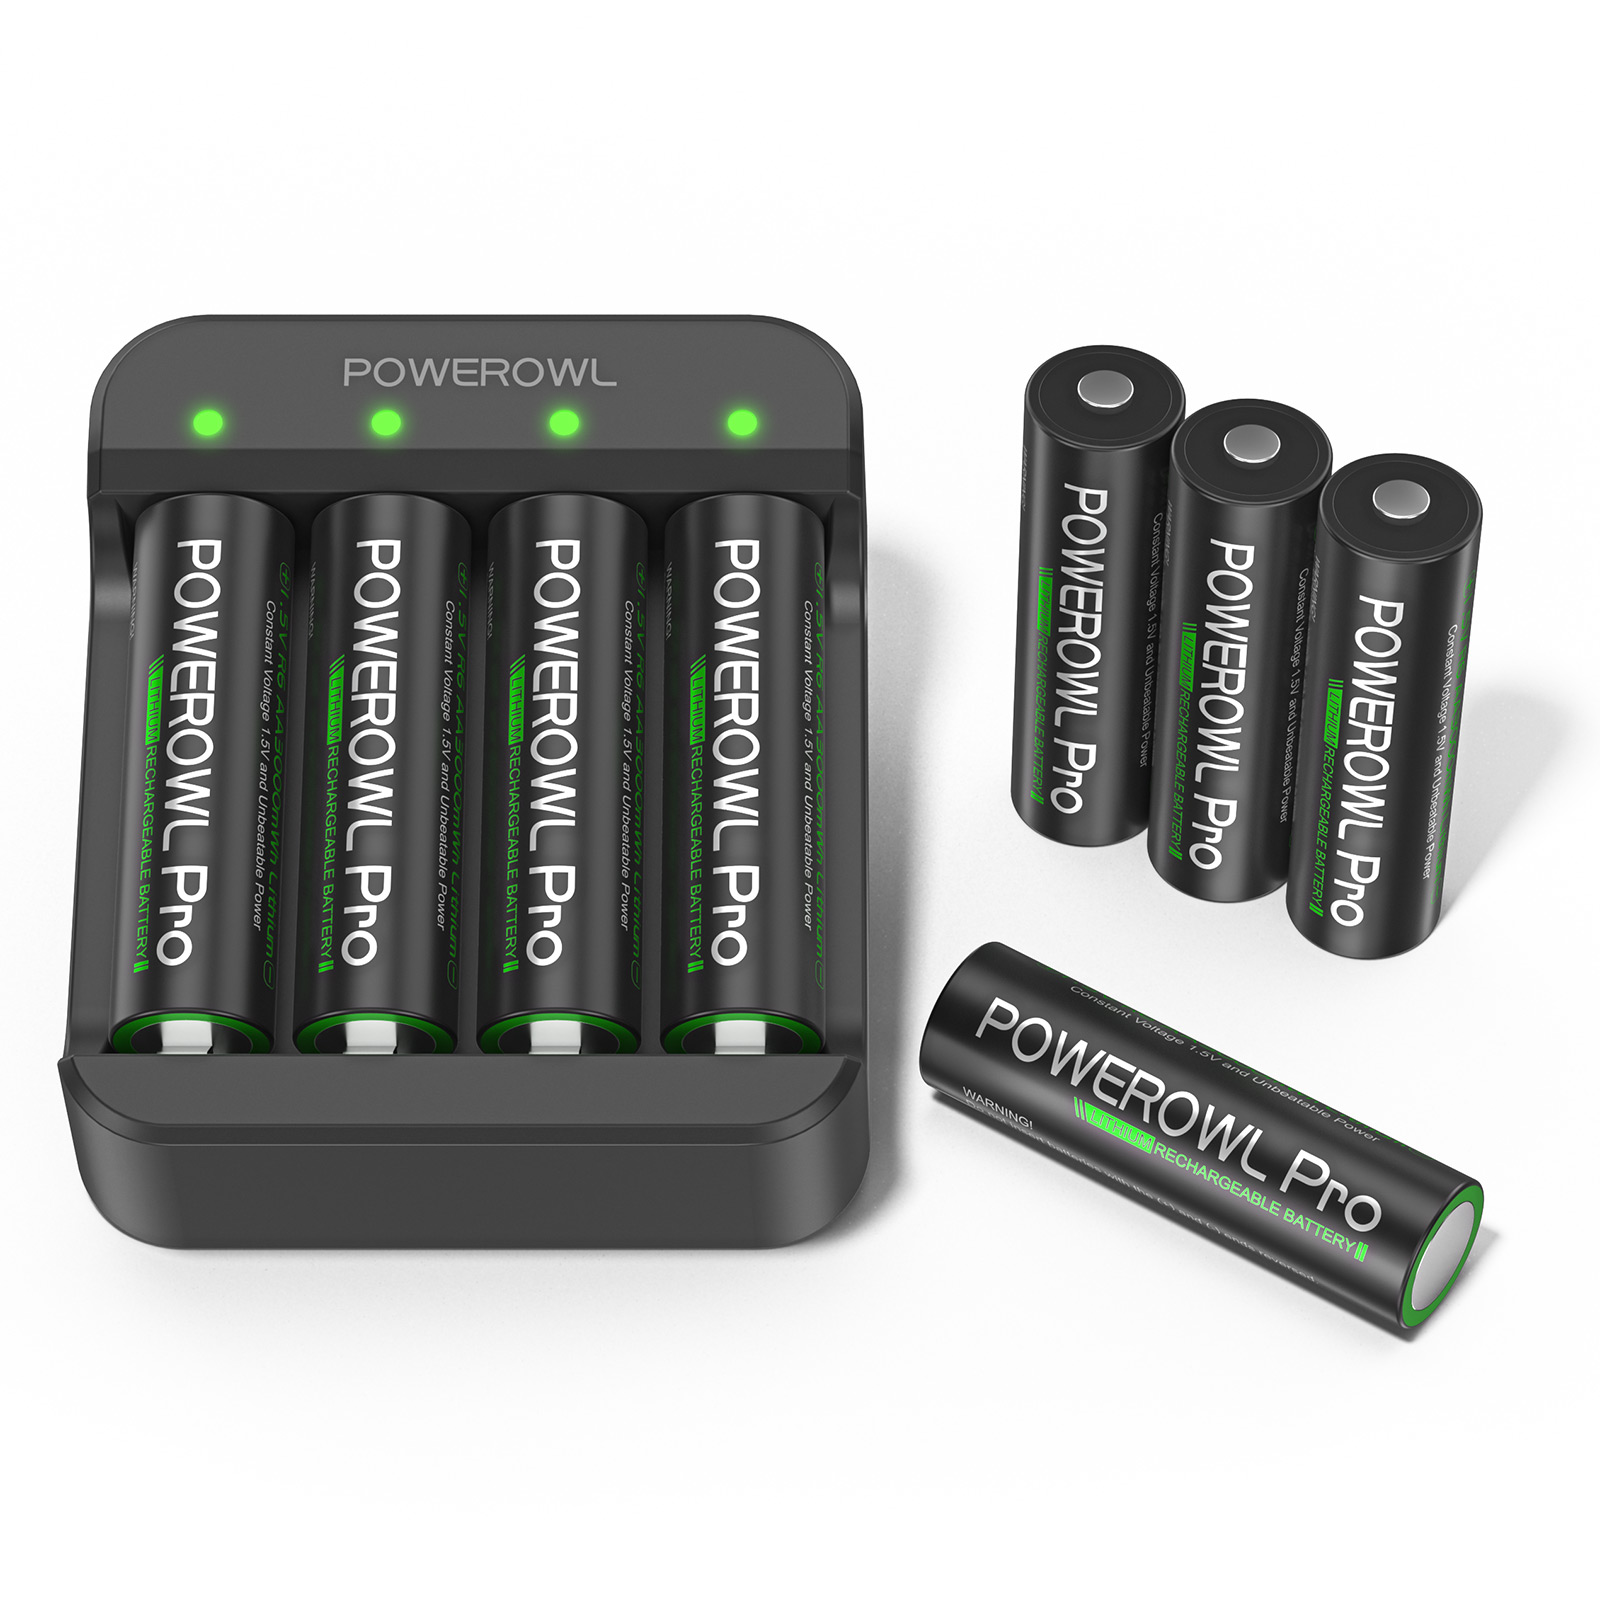 POWEROWL Lithium Rechargeable AA Batteries w/Charger, 3000mWh 1.5V Constant Voltage Double A Battery